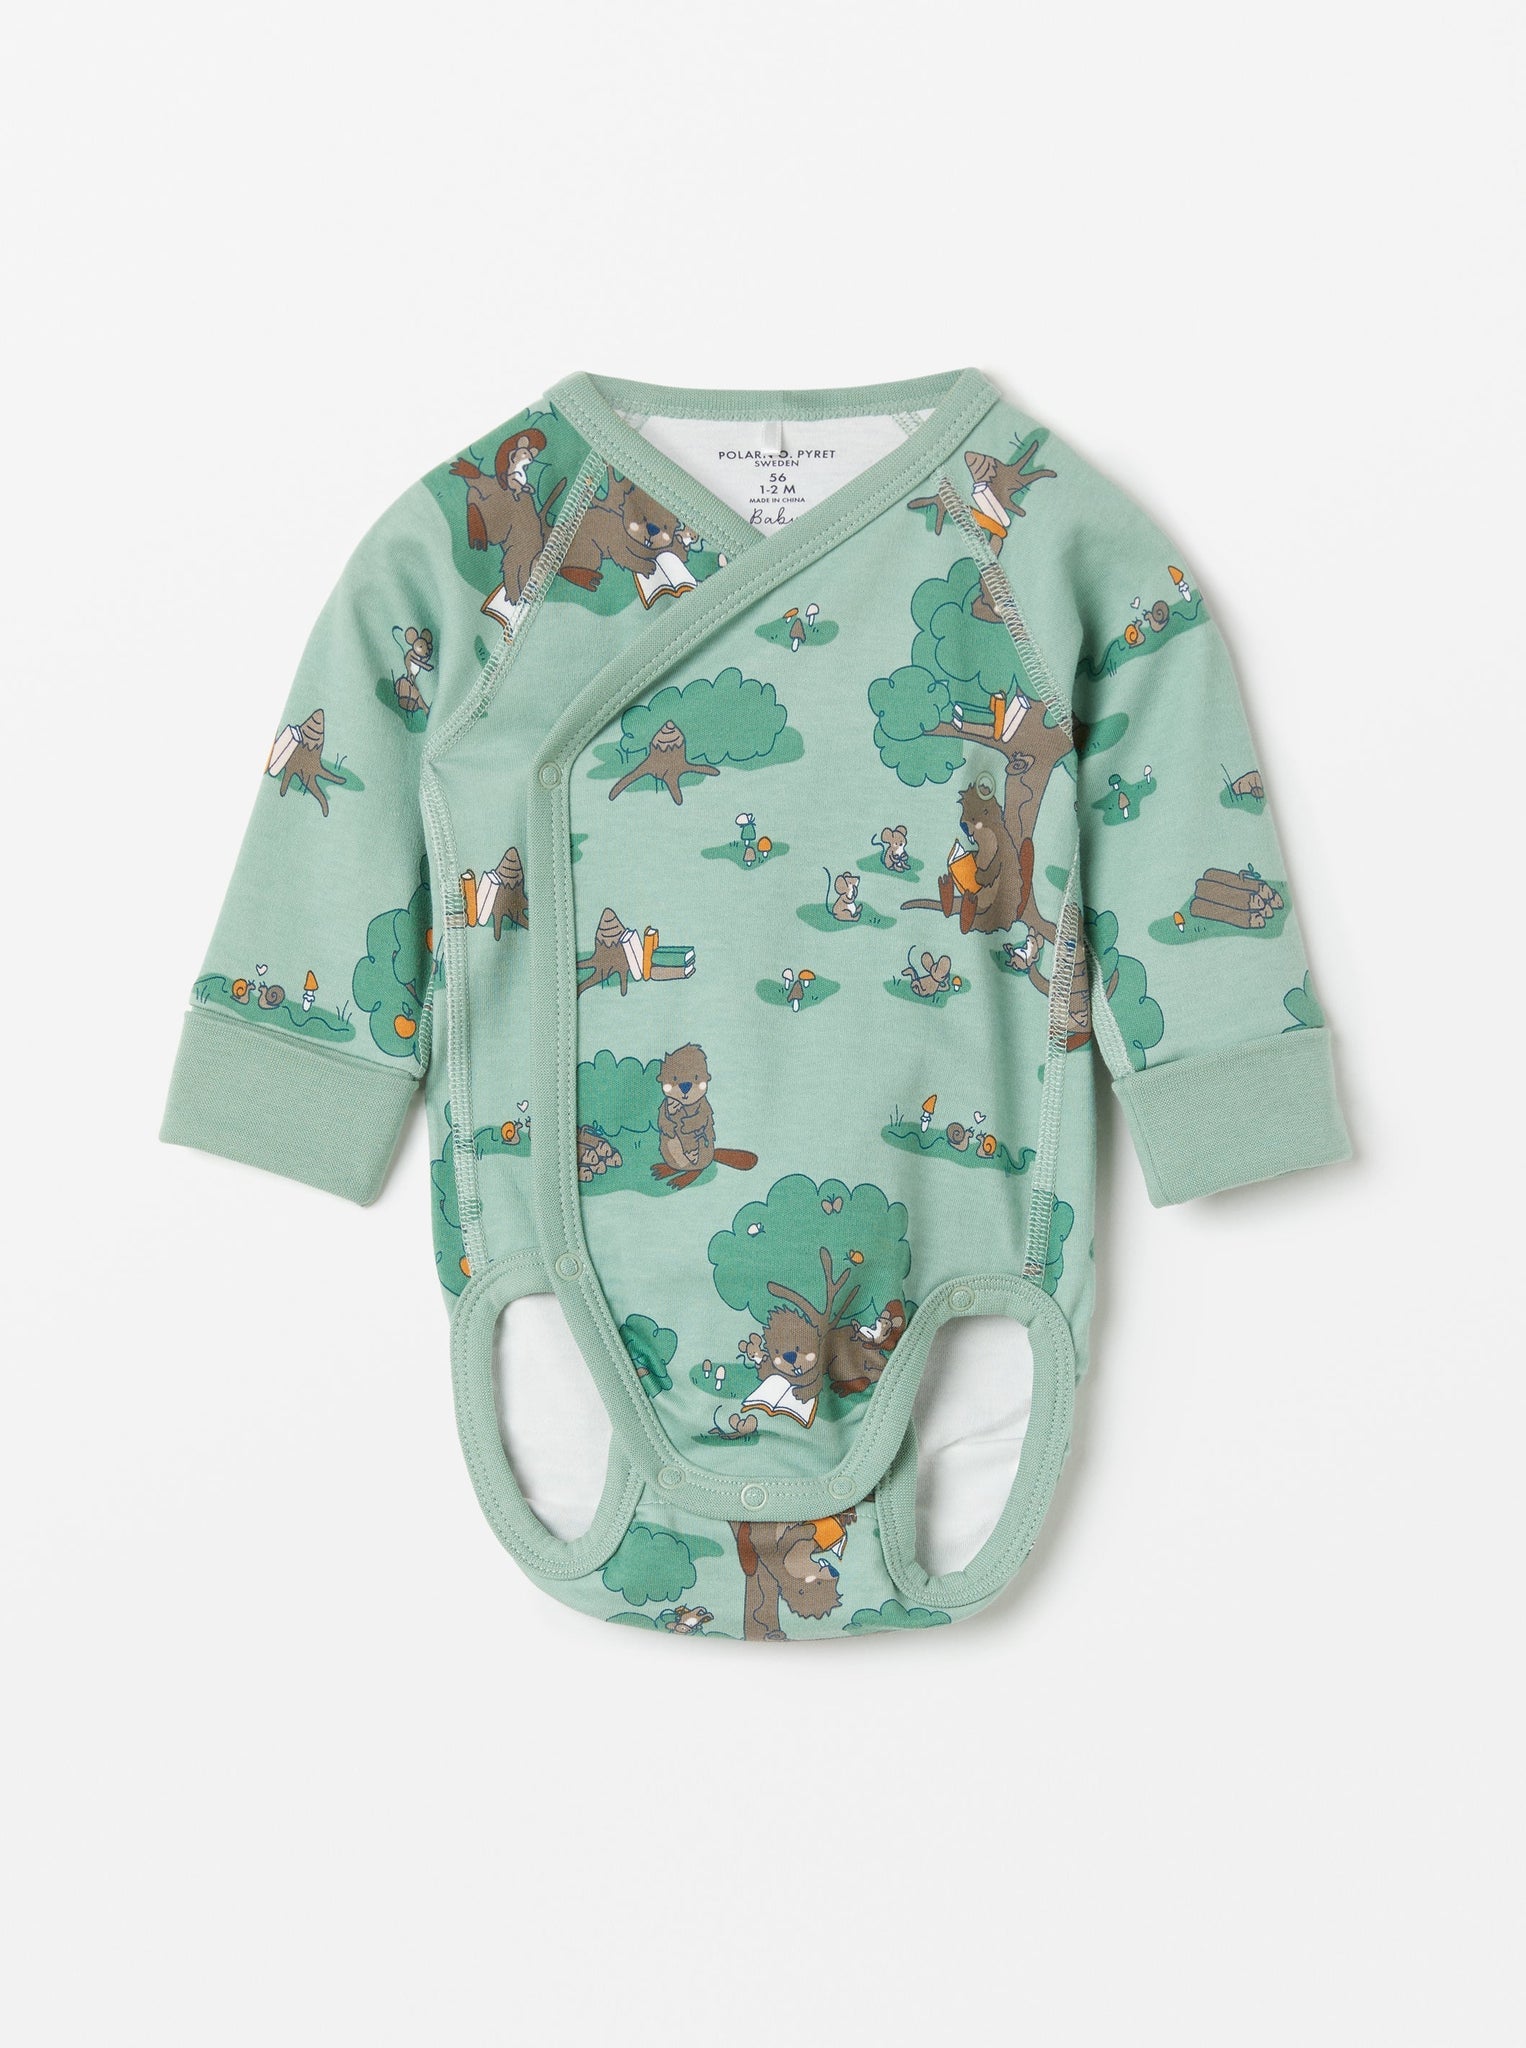 Green Cotton Wraparound Babygrow from the Polarn O. Pyret babywear collection. Nordic baby clothes made from sustainable sources.